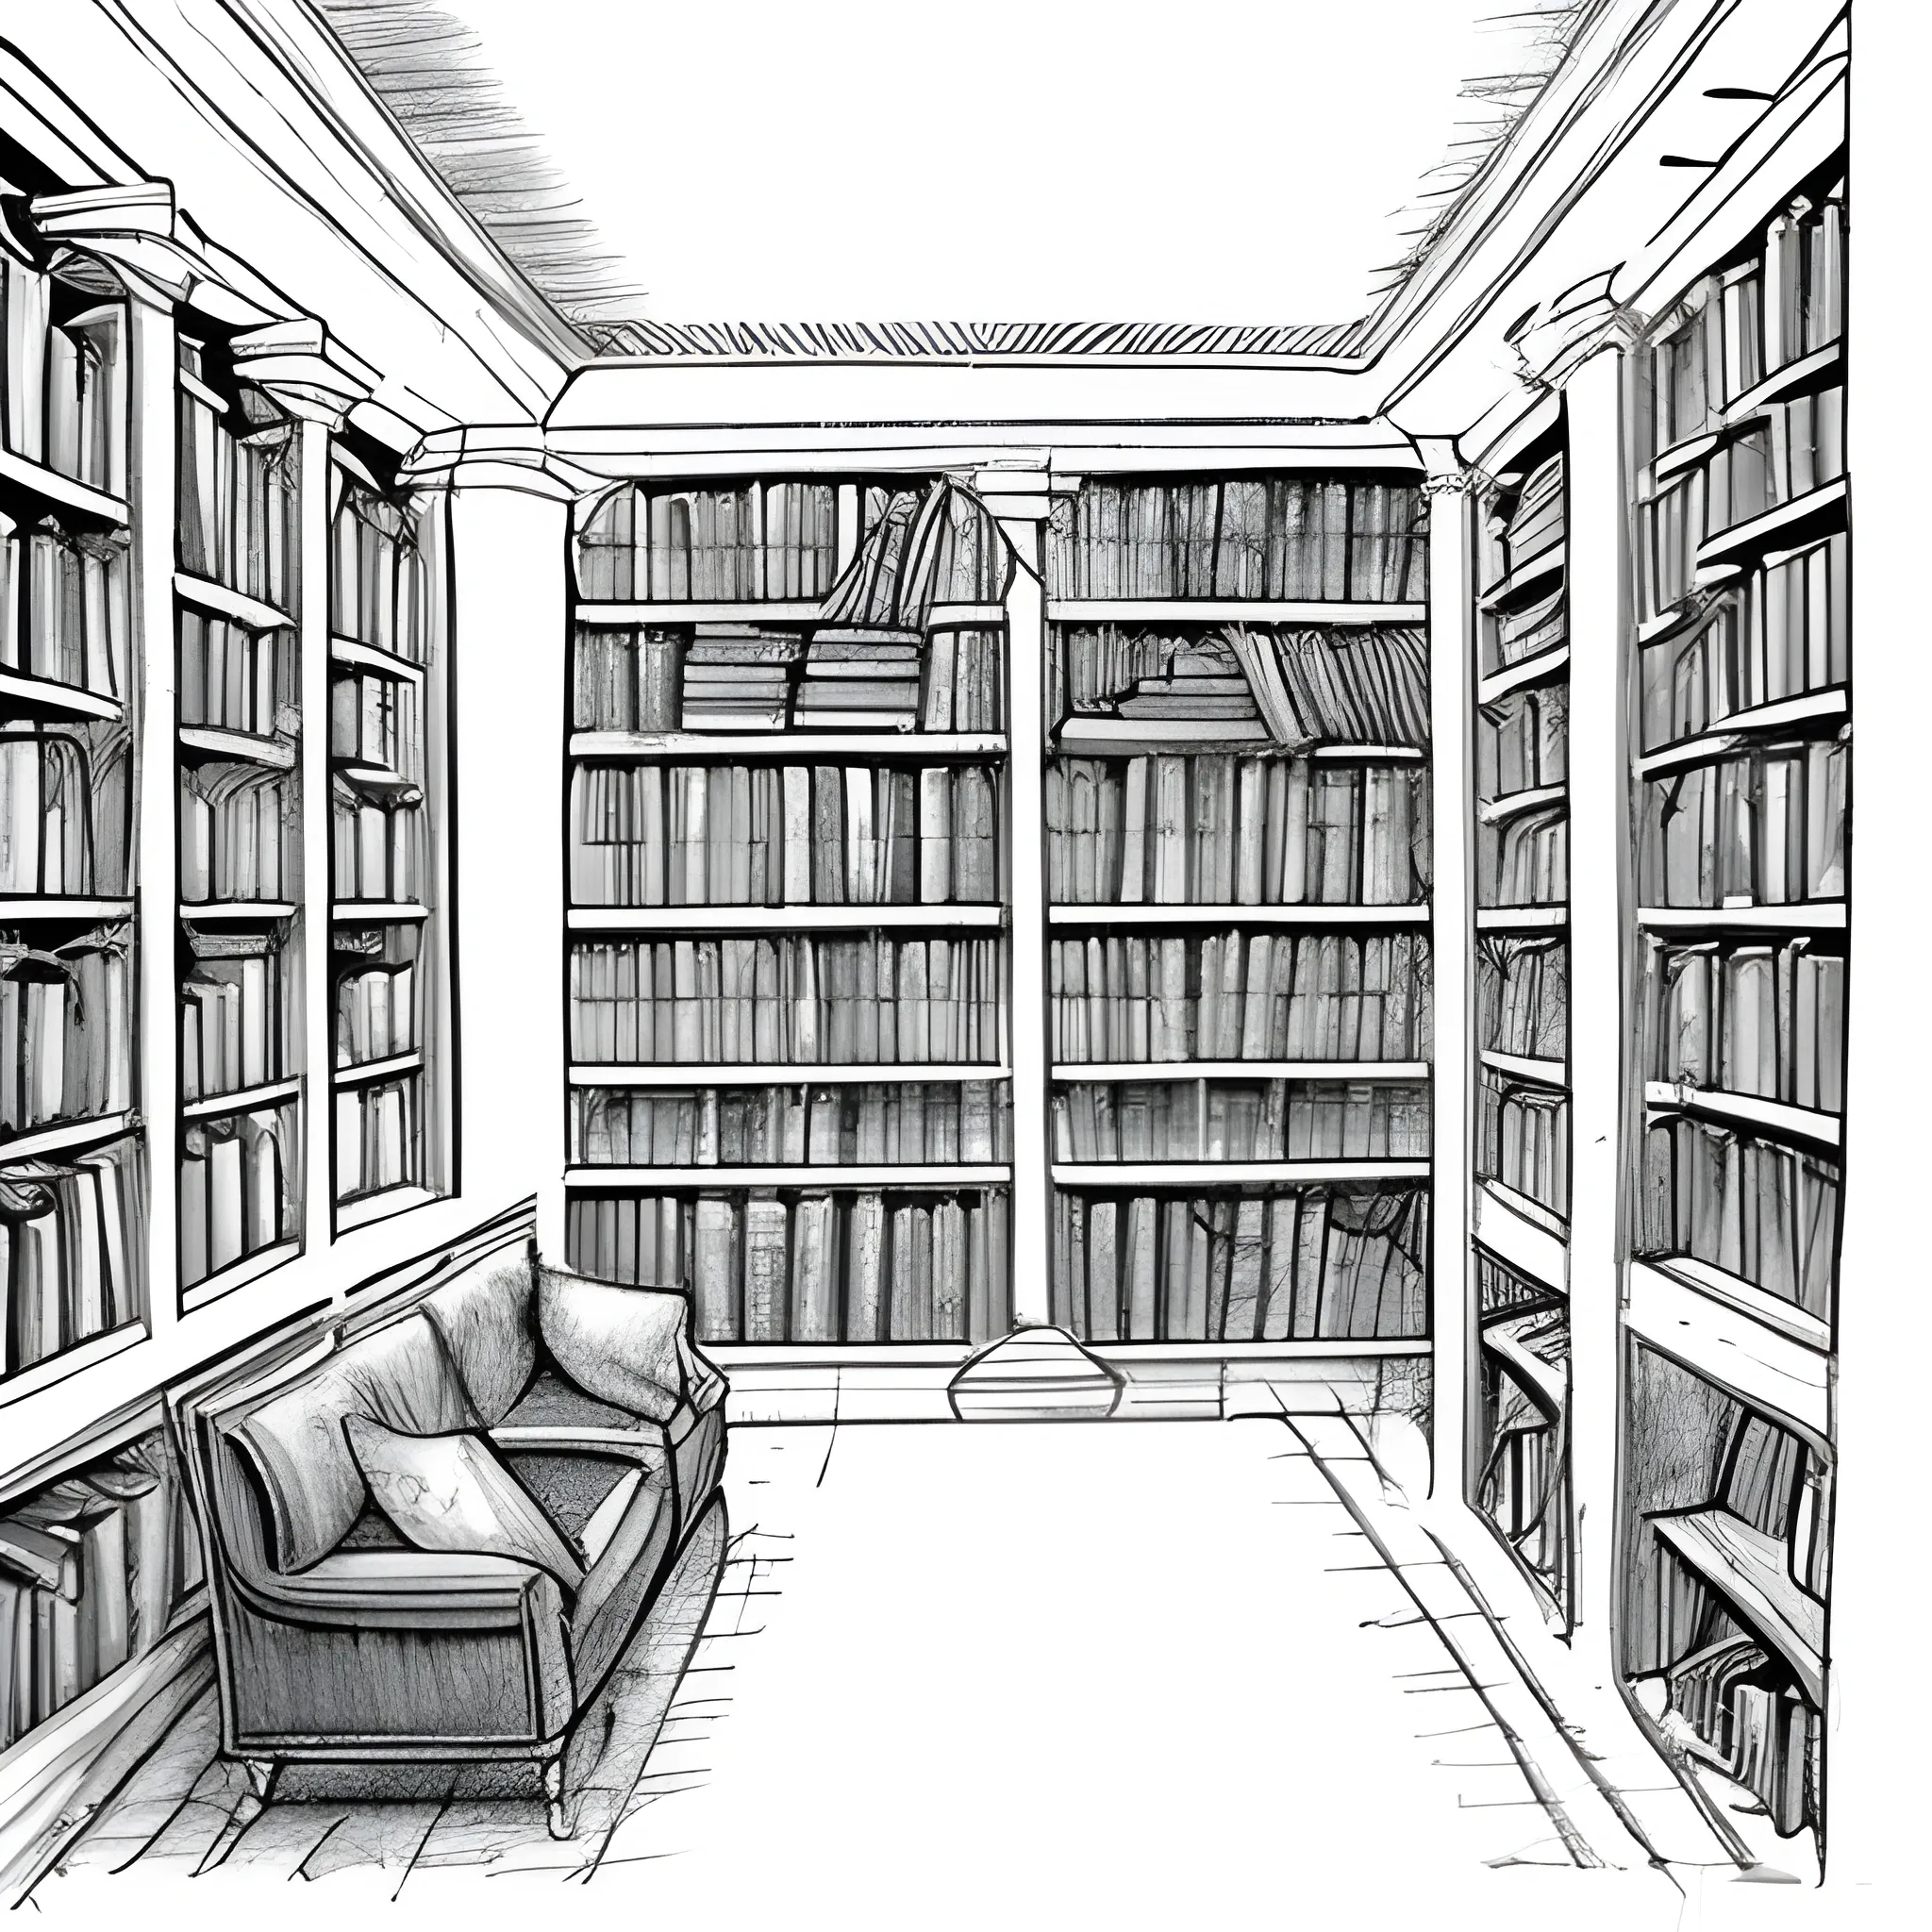 This is a background image for a reading blog. Create an image of a cozy library filled with books sketched in pencil.